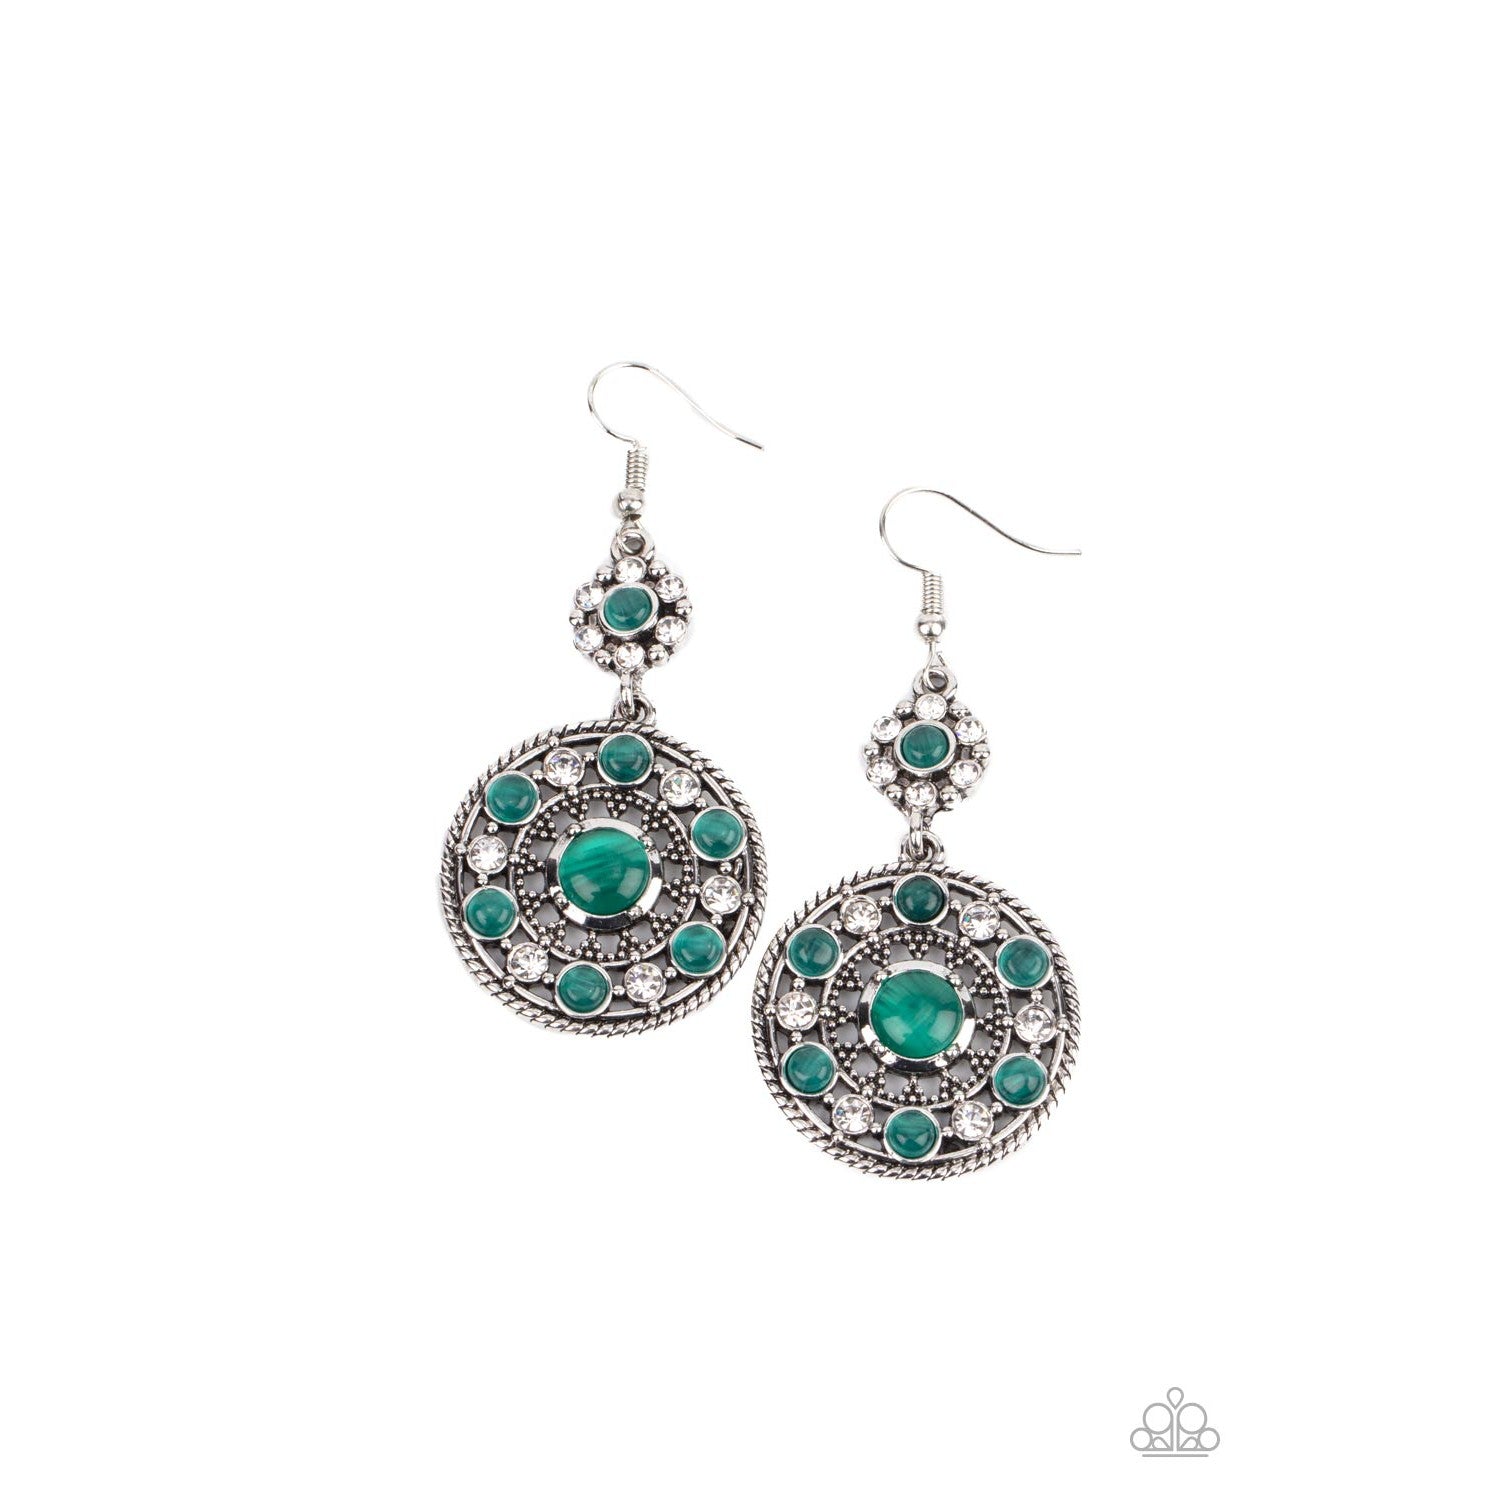 Party at My PALACE - Green Earrings - Bling by Danielle Baker